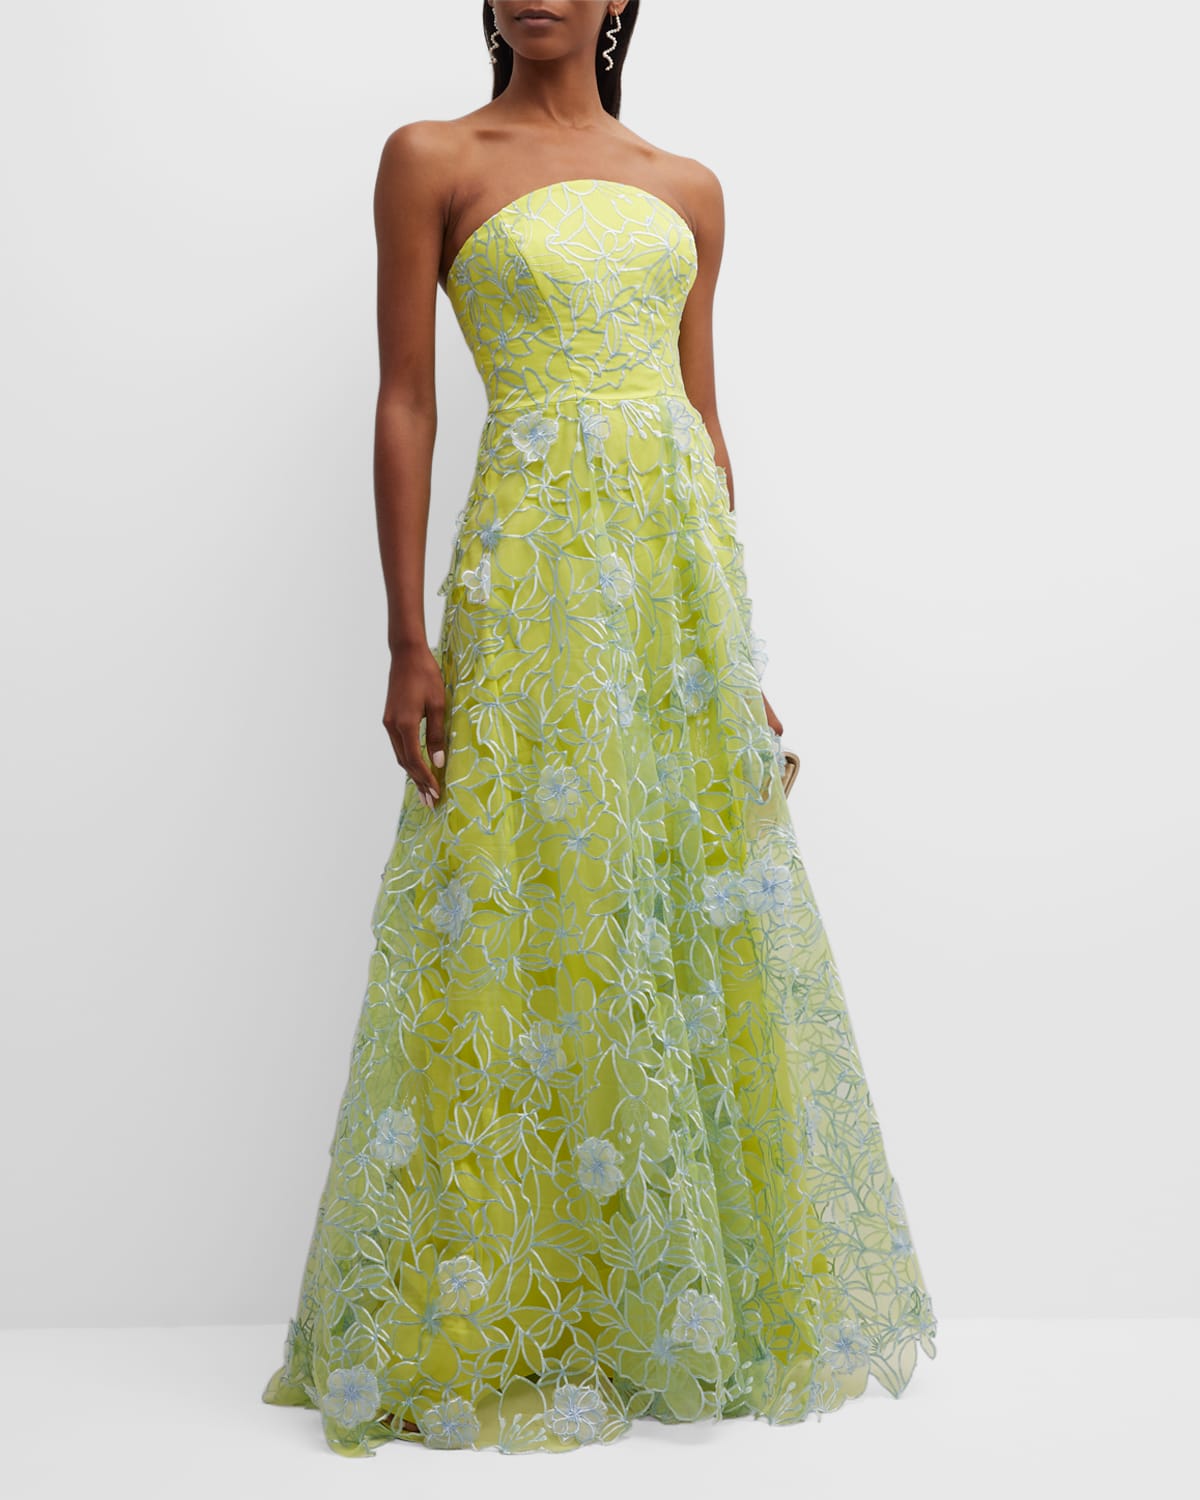 MARCHESA NOTTE STRAPLESS CUTOUT FLORAL-EMBROIDERED GOWN